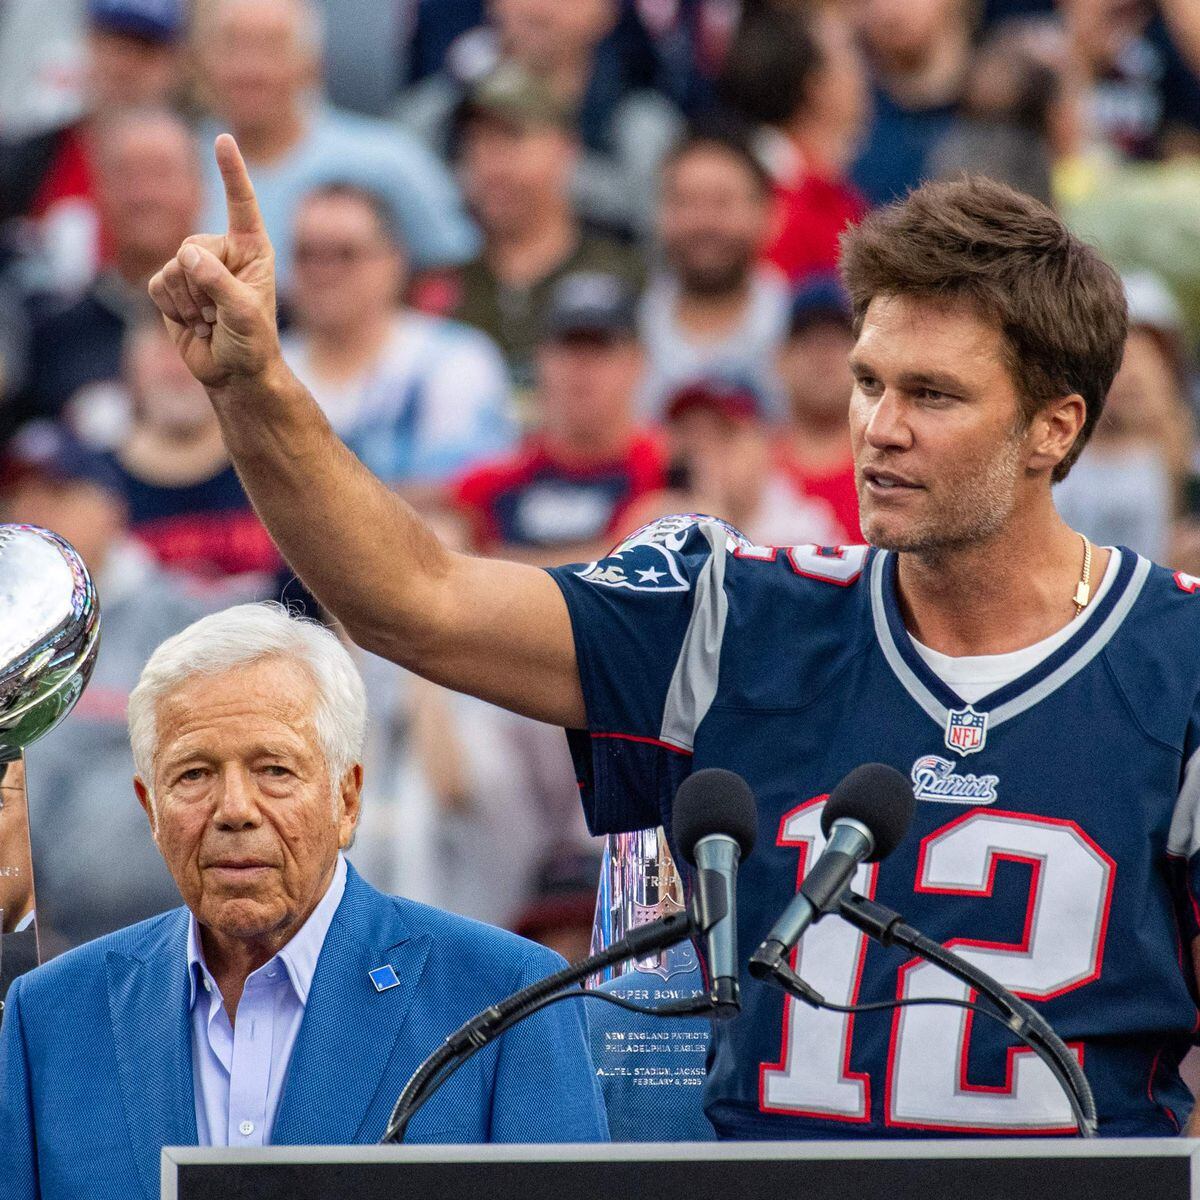 Tom Brady Rumored To Potentially Unretire From NFL Once Again?